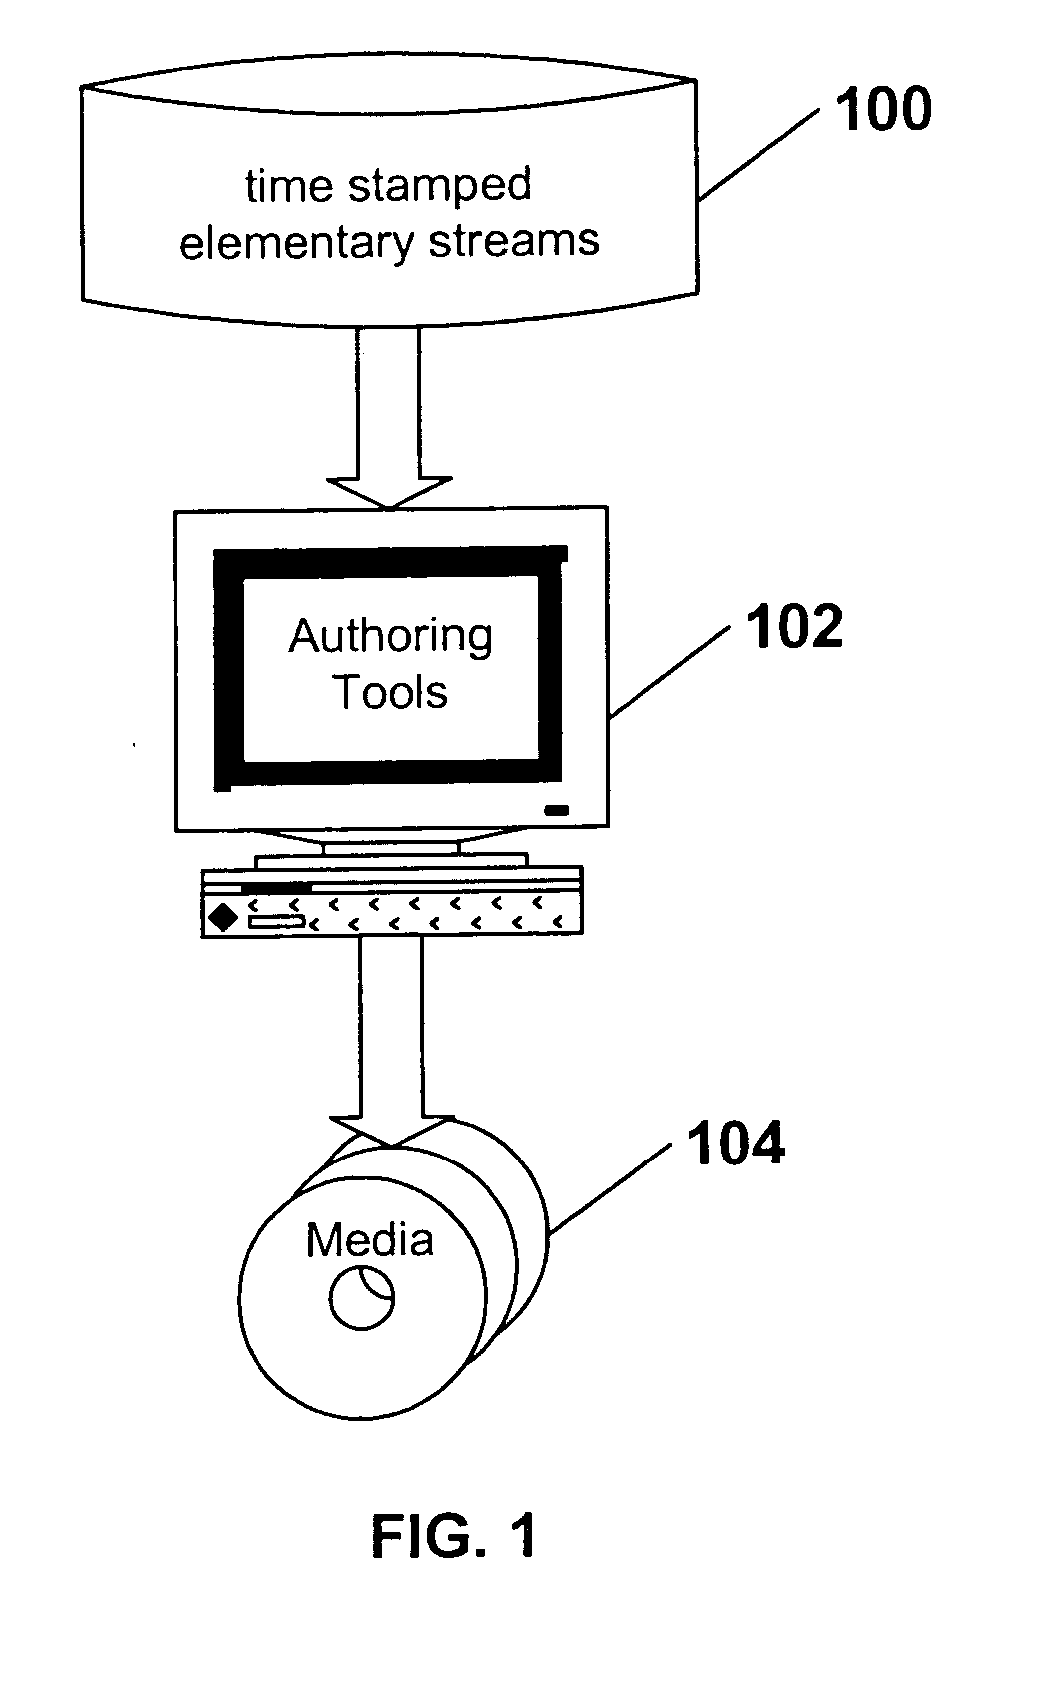 High definition media storage structure and playback mechanism